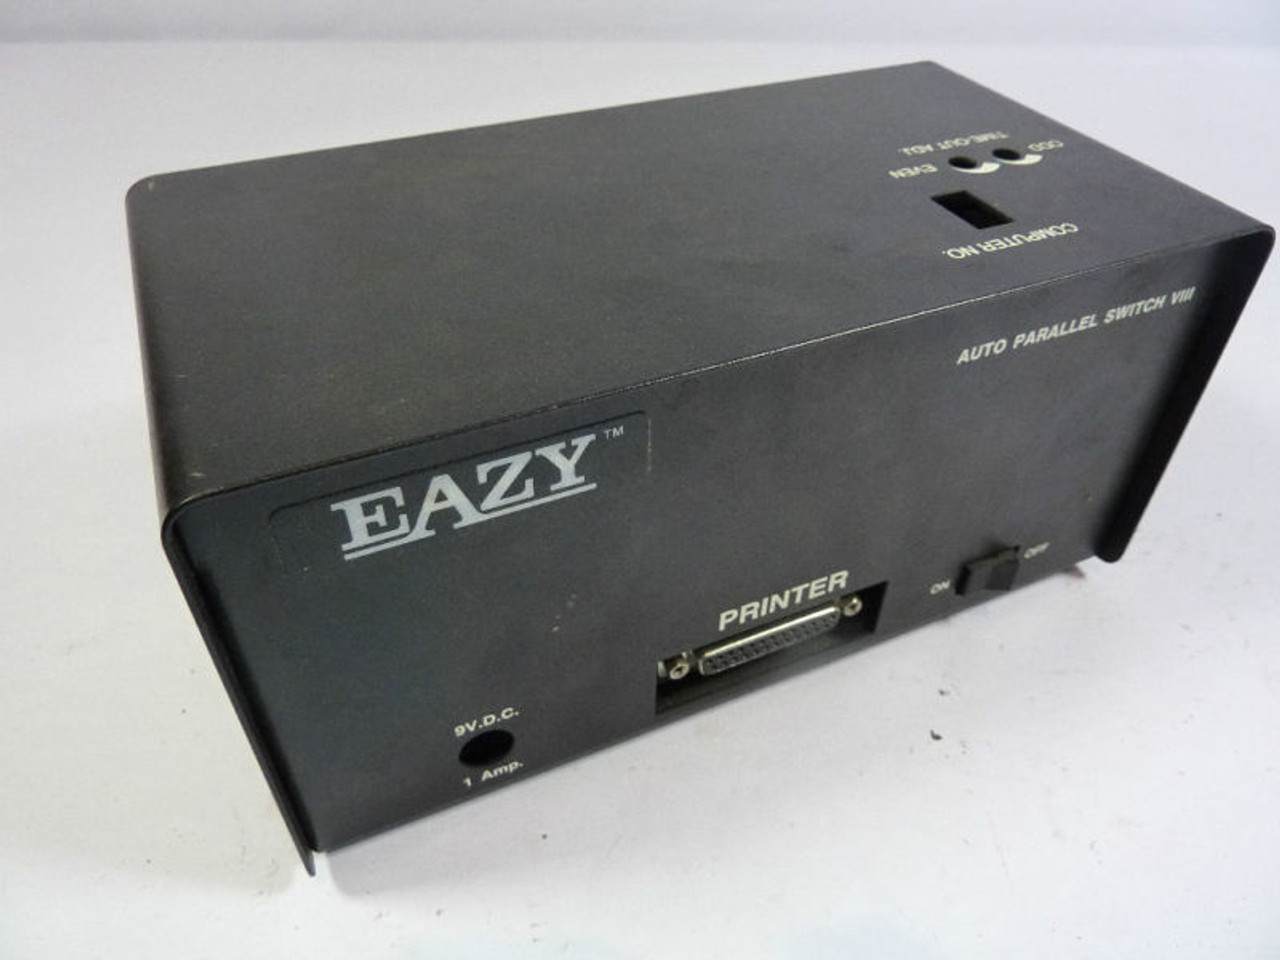 Eazy SW809A Auto Parallel Switch USED